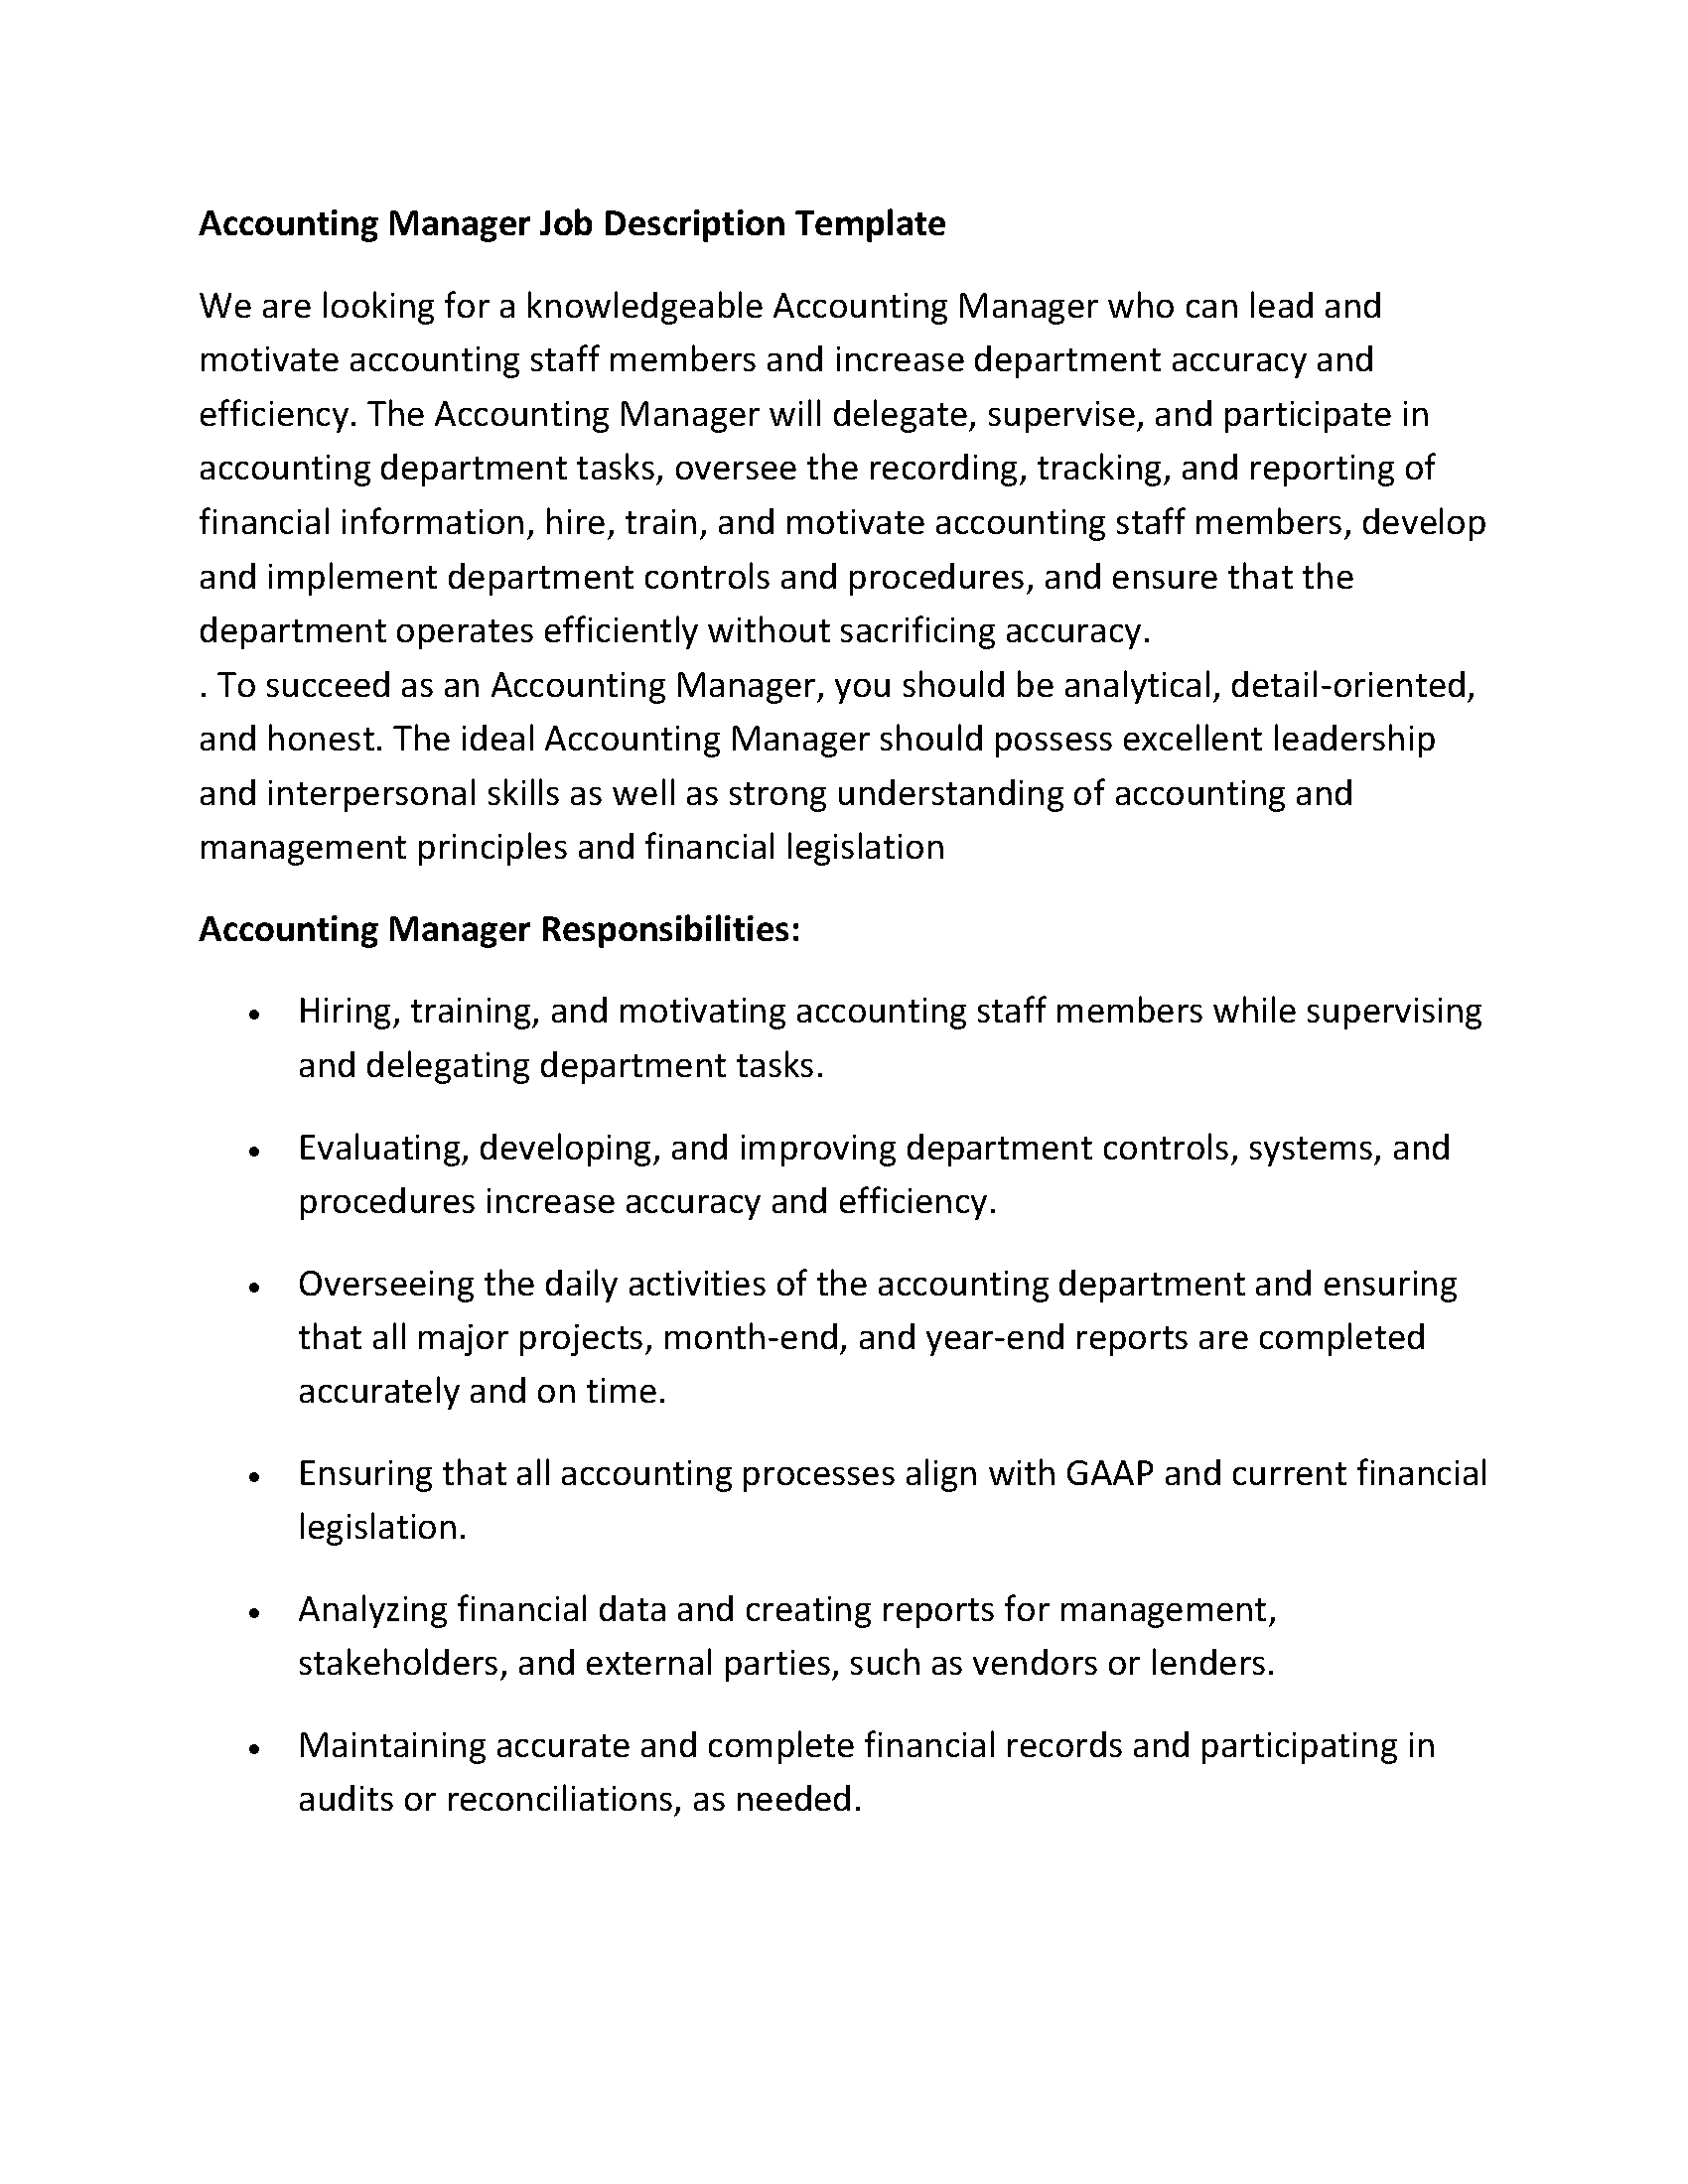 Accounting Manager Job Description Template